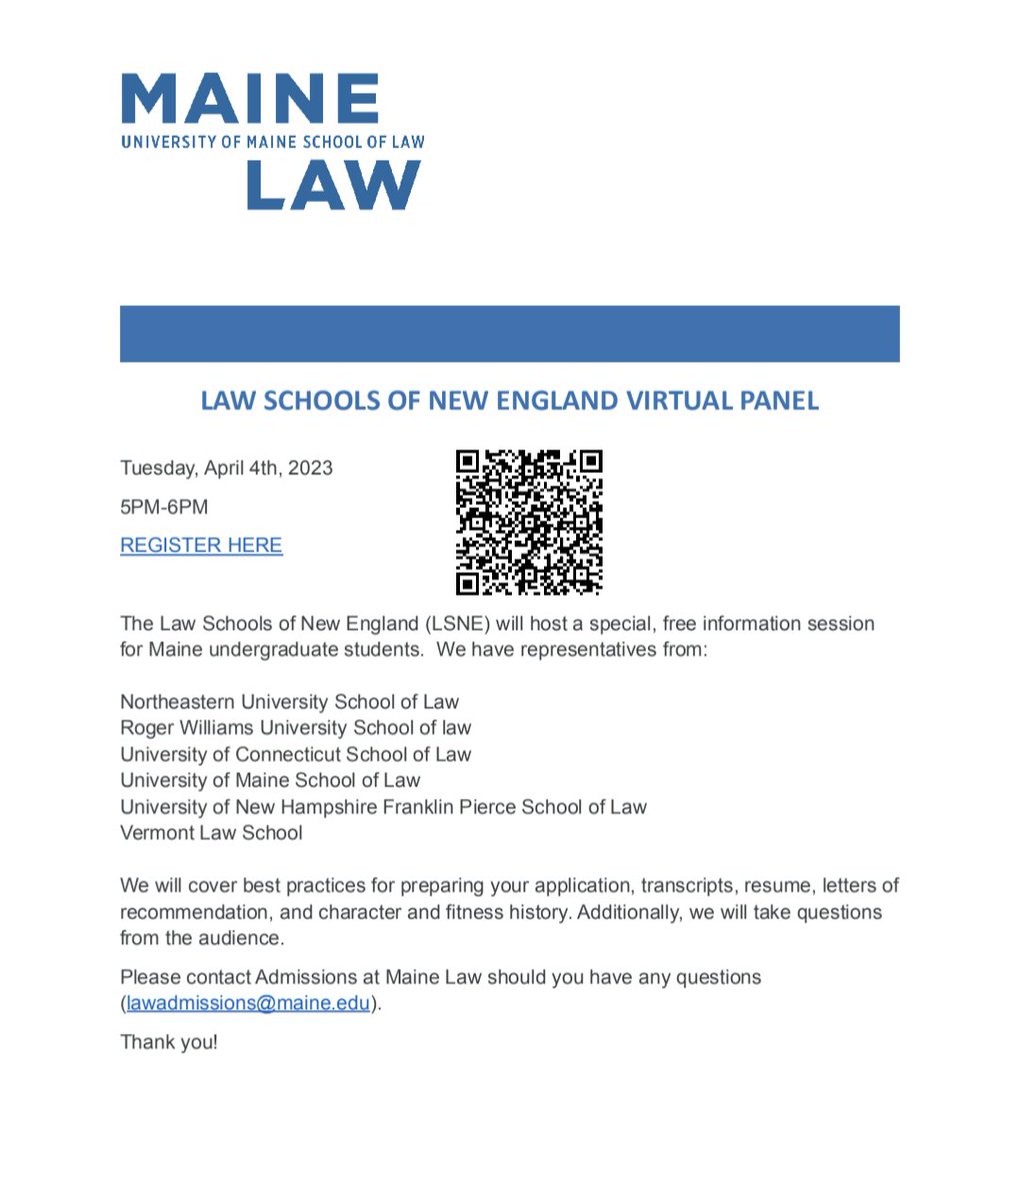 The Law Schools of New England (LSNE) will host a special, free, virtual information session for Maine undergraduate students on Tuesday, April 4th at 5PM. More info below.